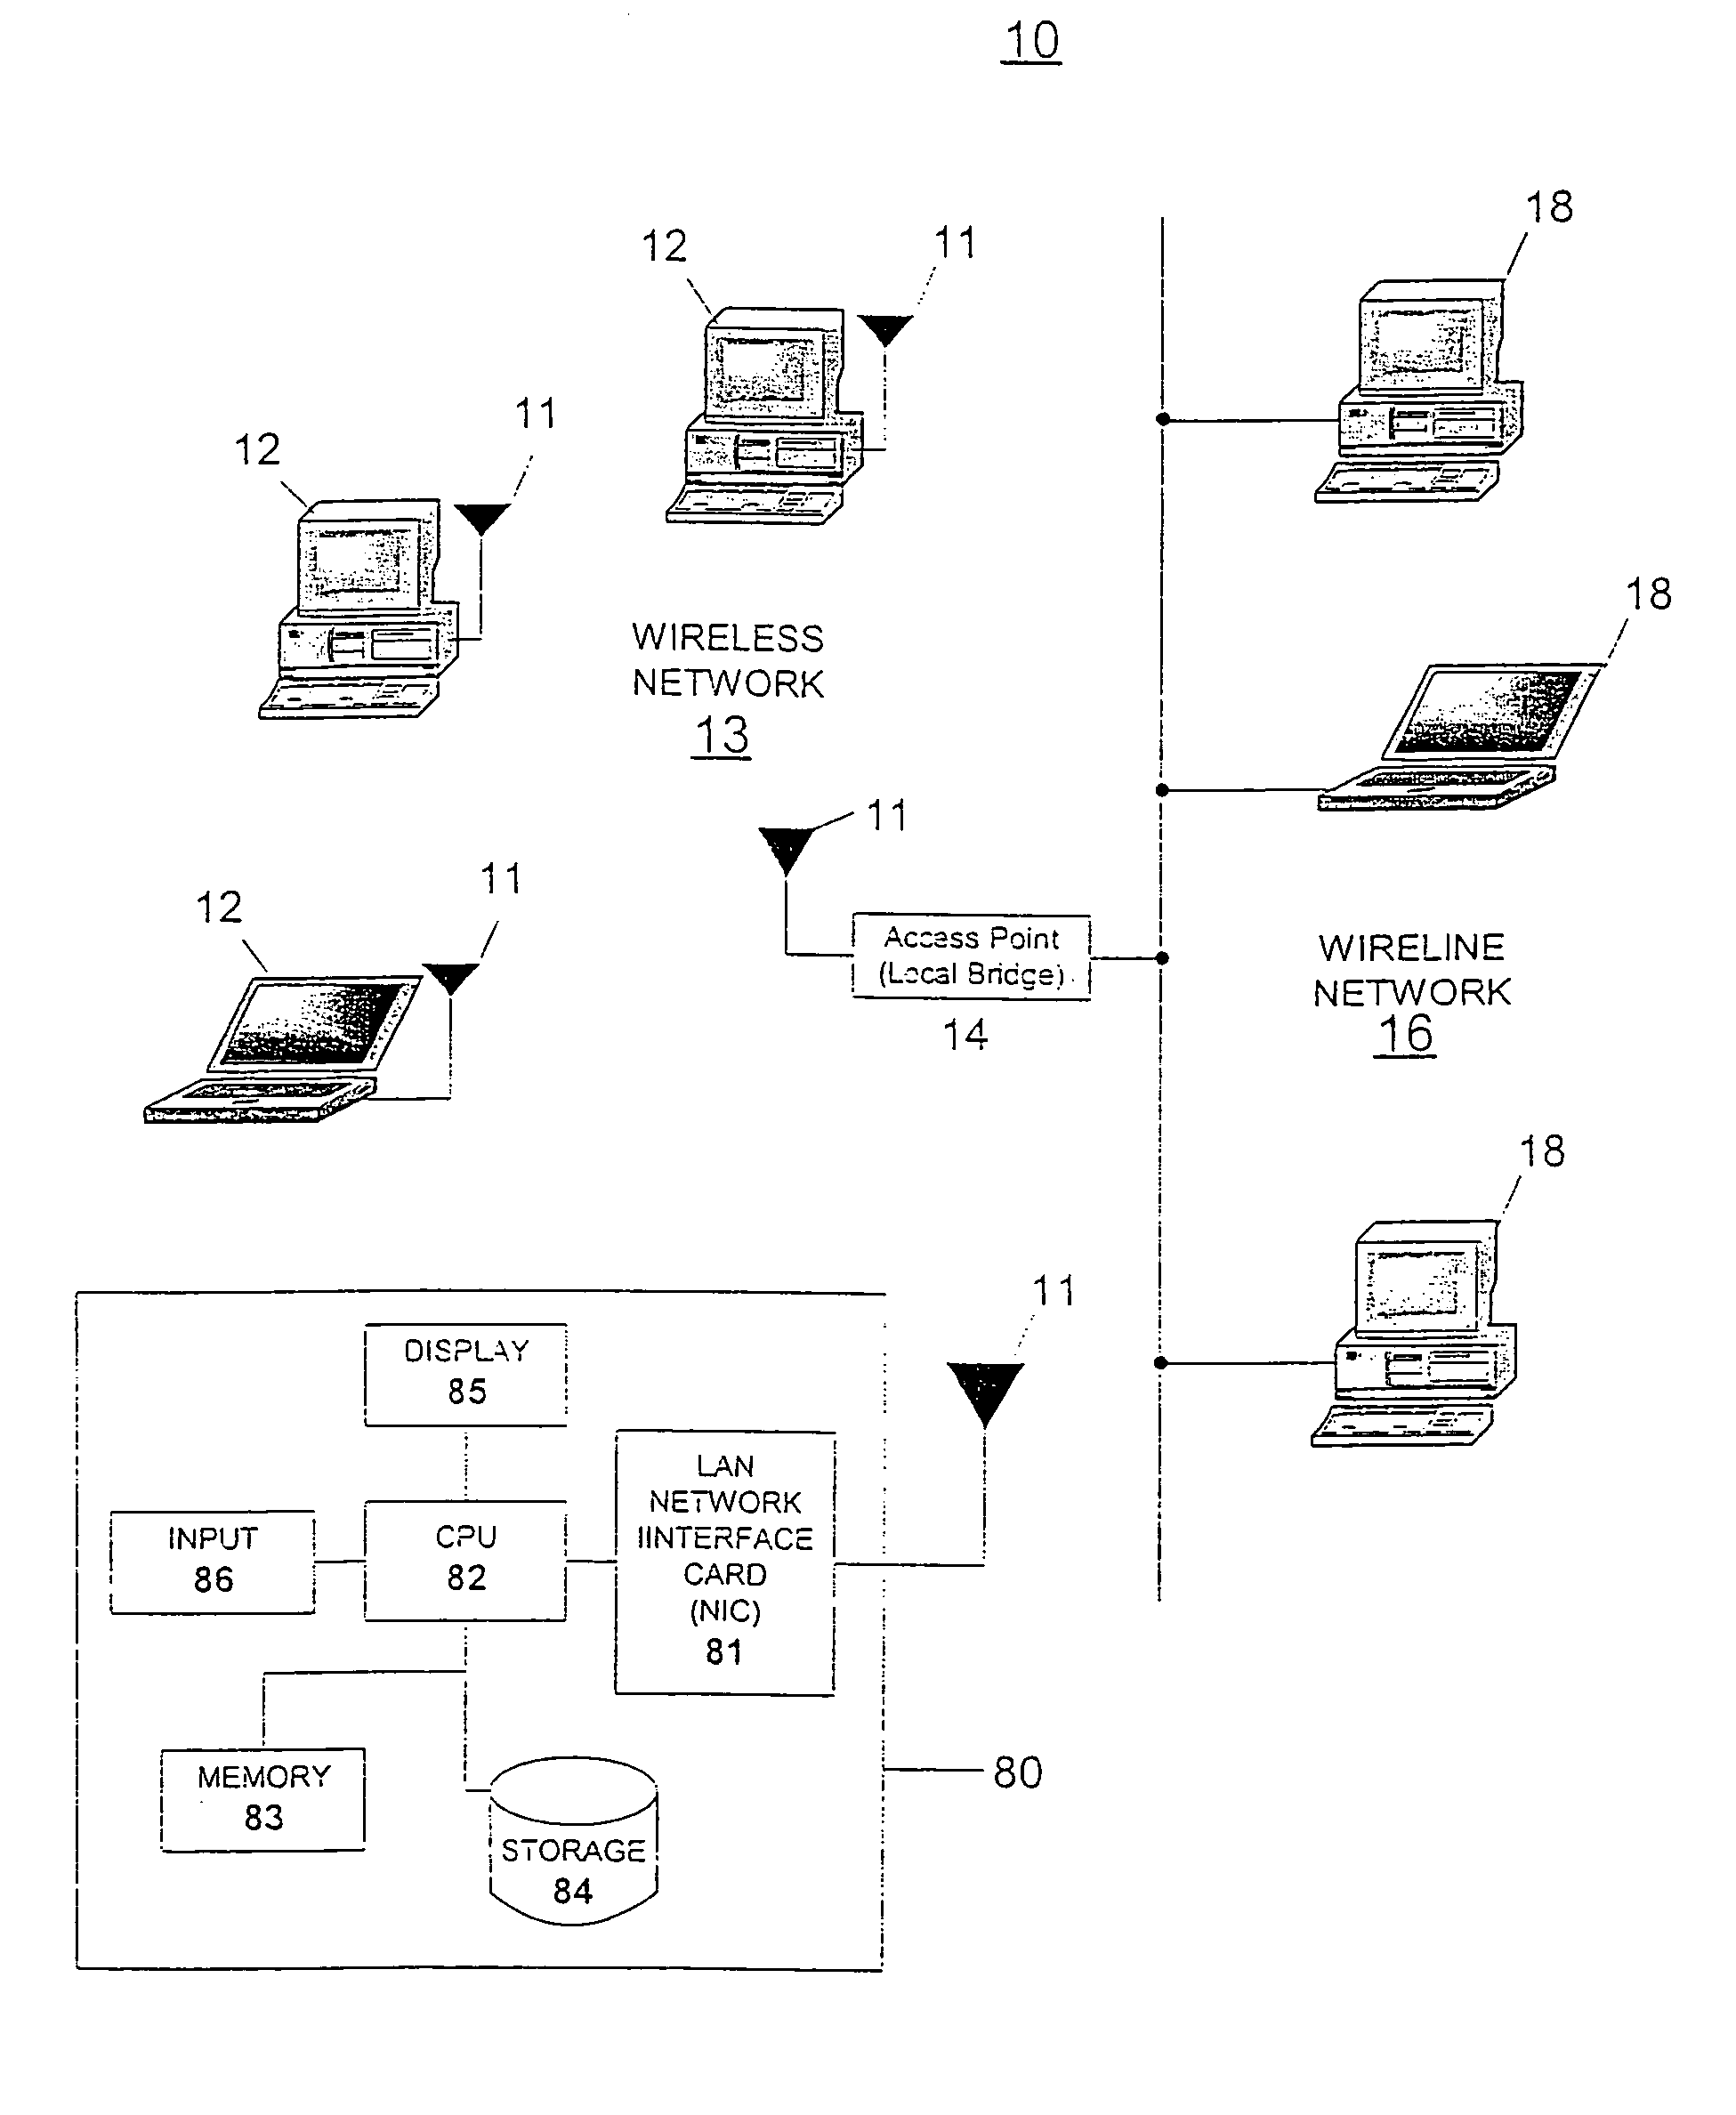 Method and apparatus for detailed protocol analysis of frames captured in an IEEE 802.11(b) wireless LAN